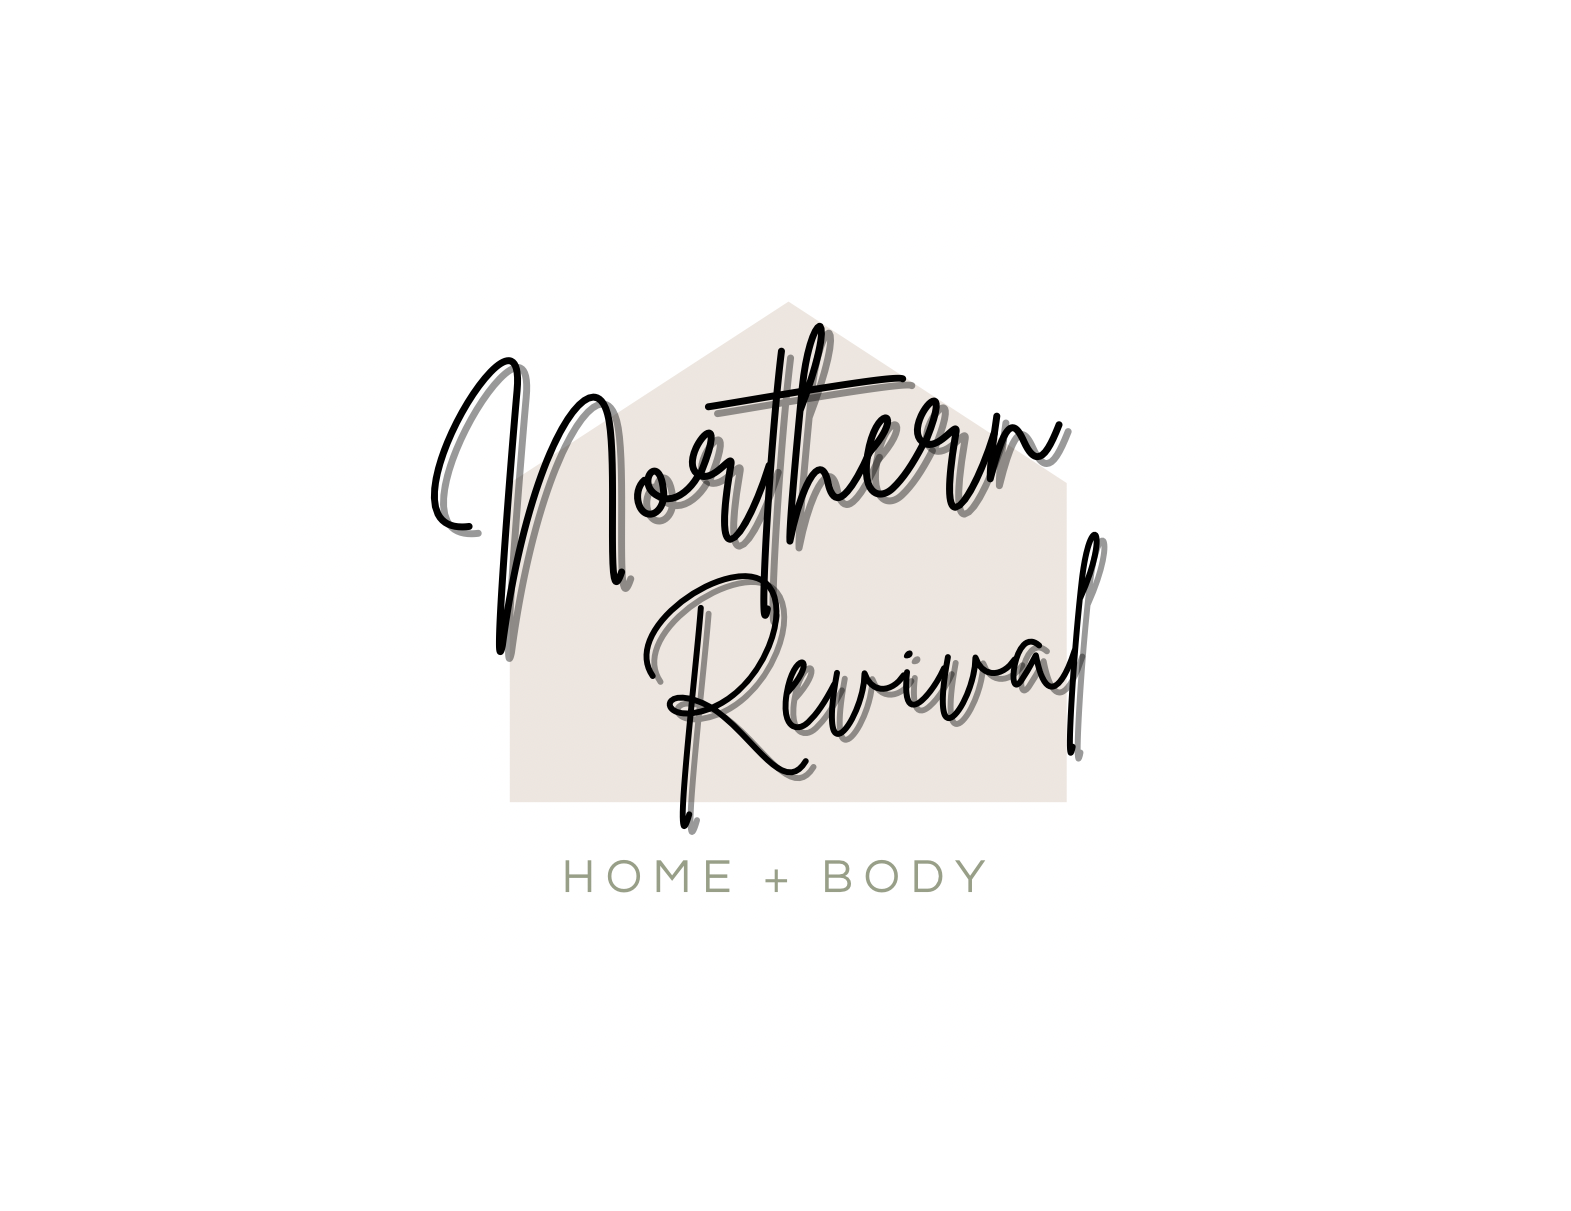 Home and Body Come Together - Northern Revival Co.